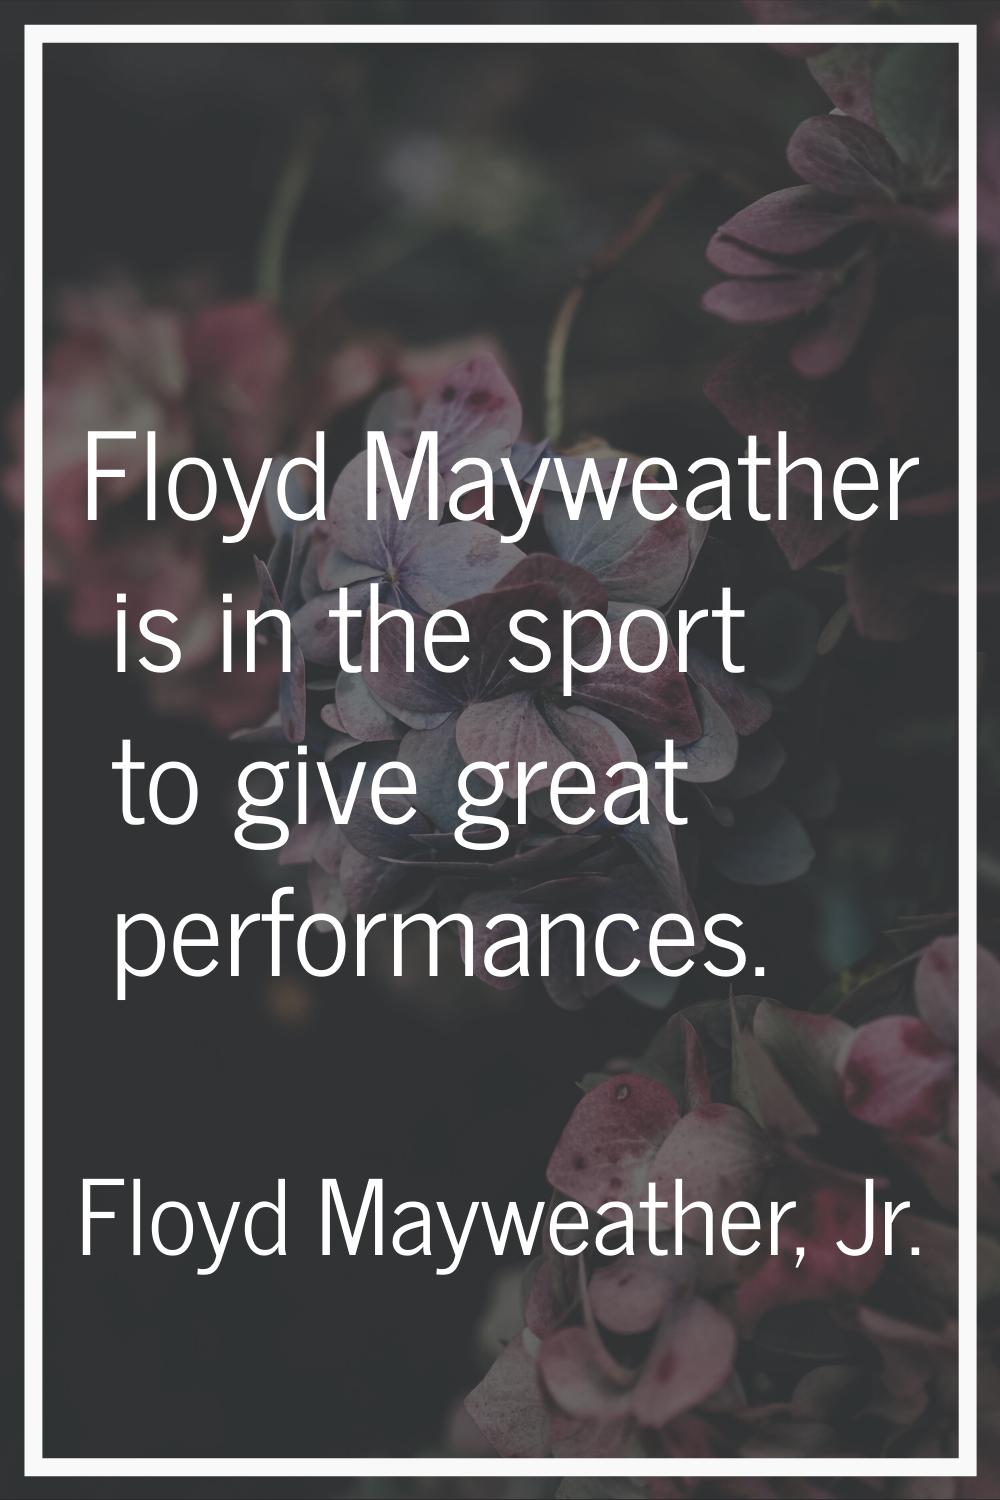 Floyd Mayweather is in the sport to give great performances.